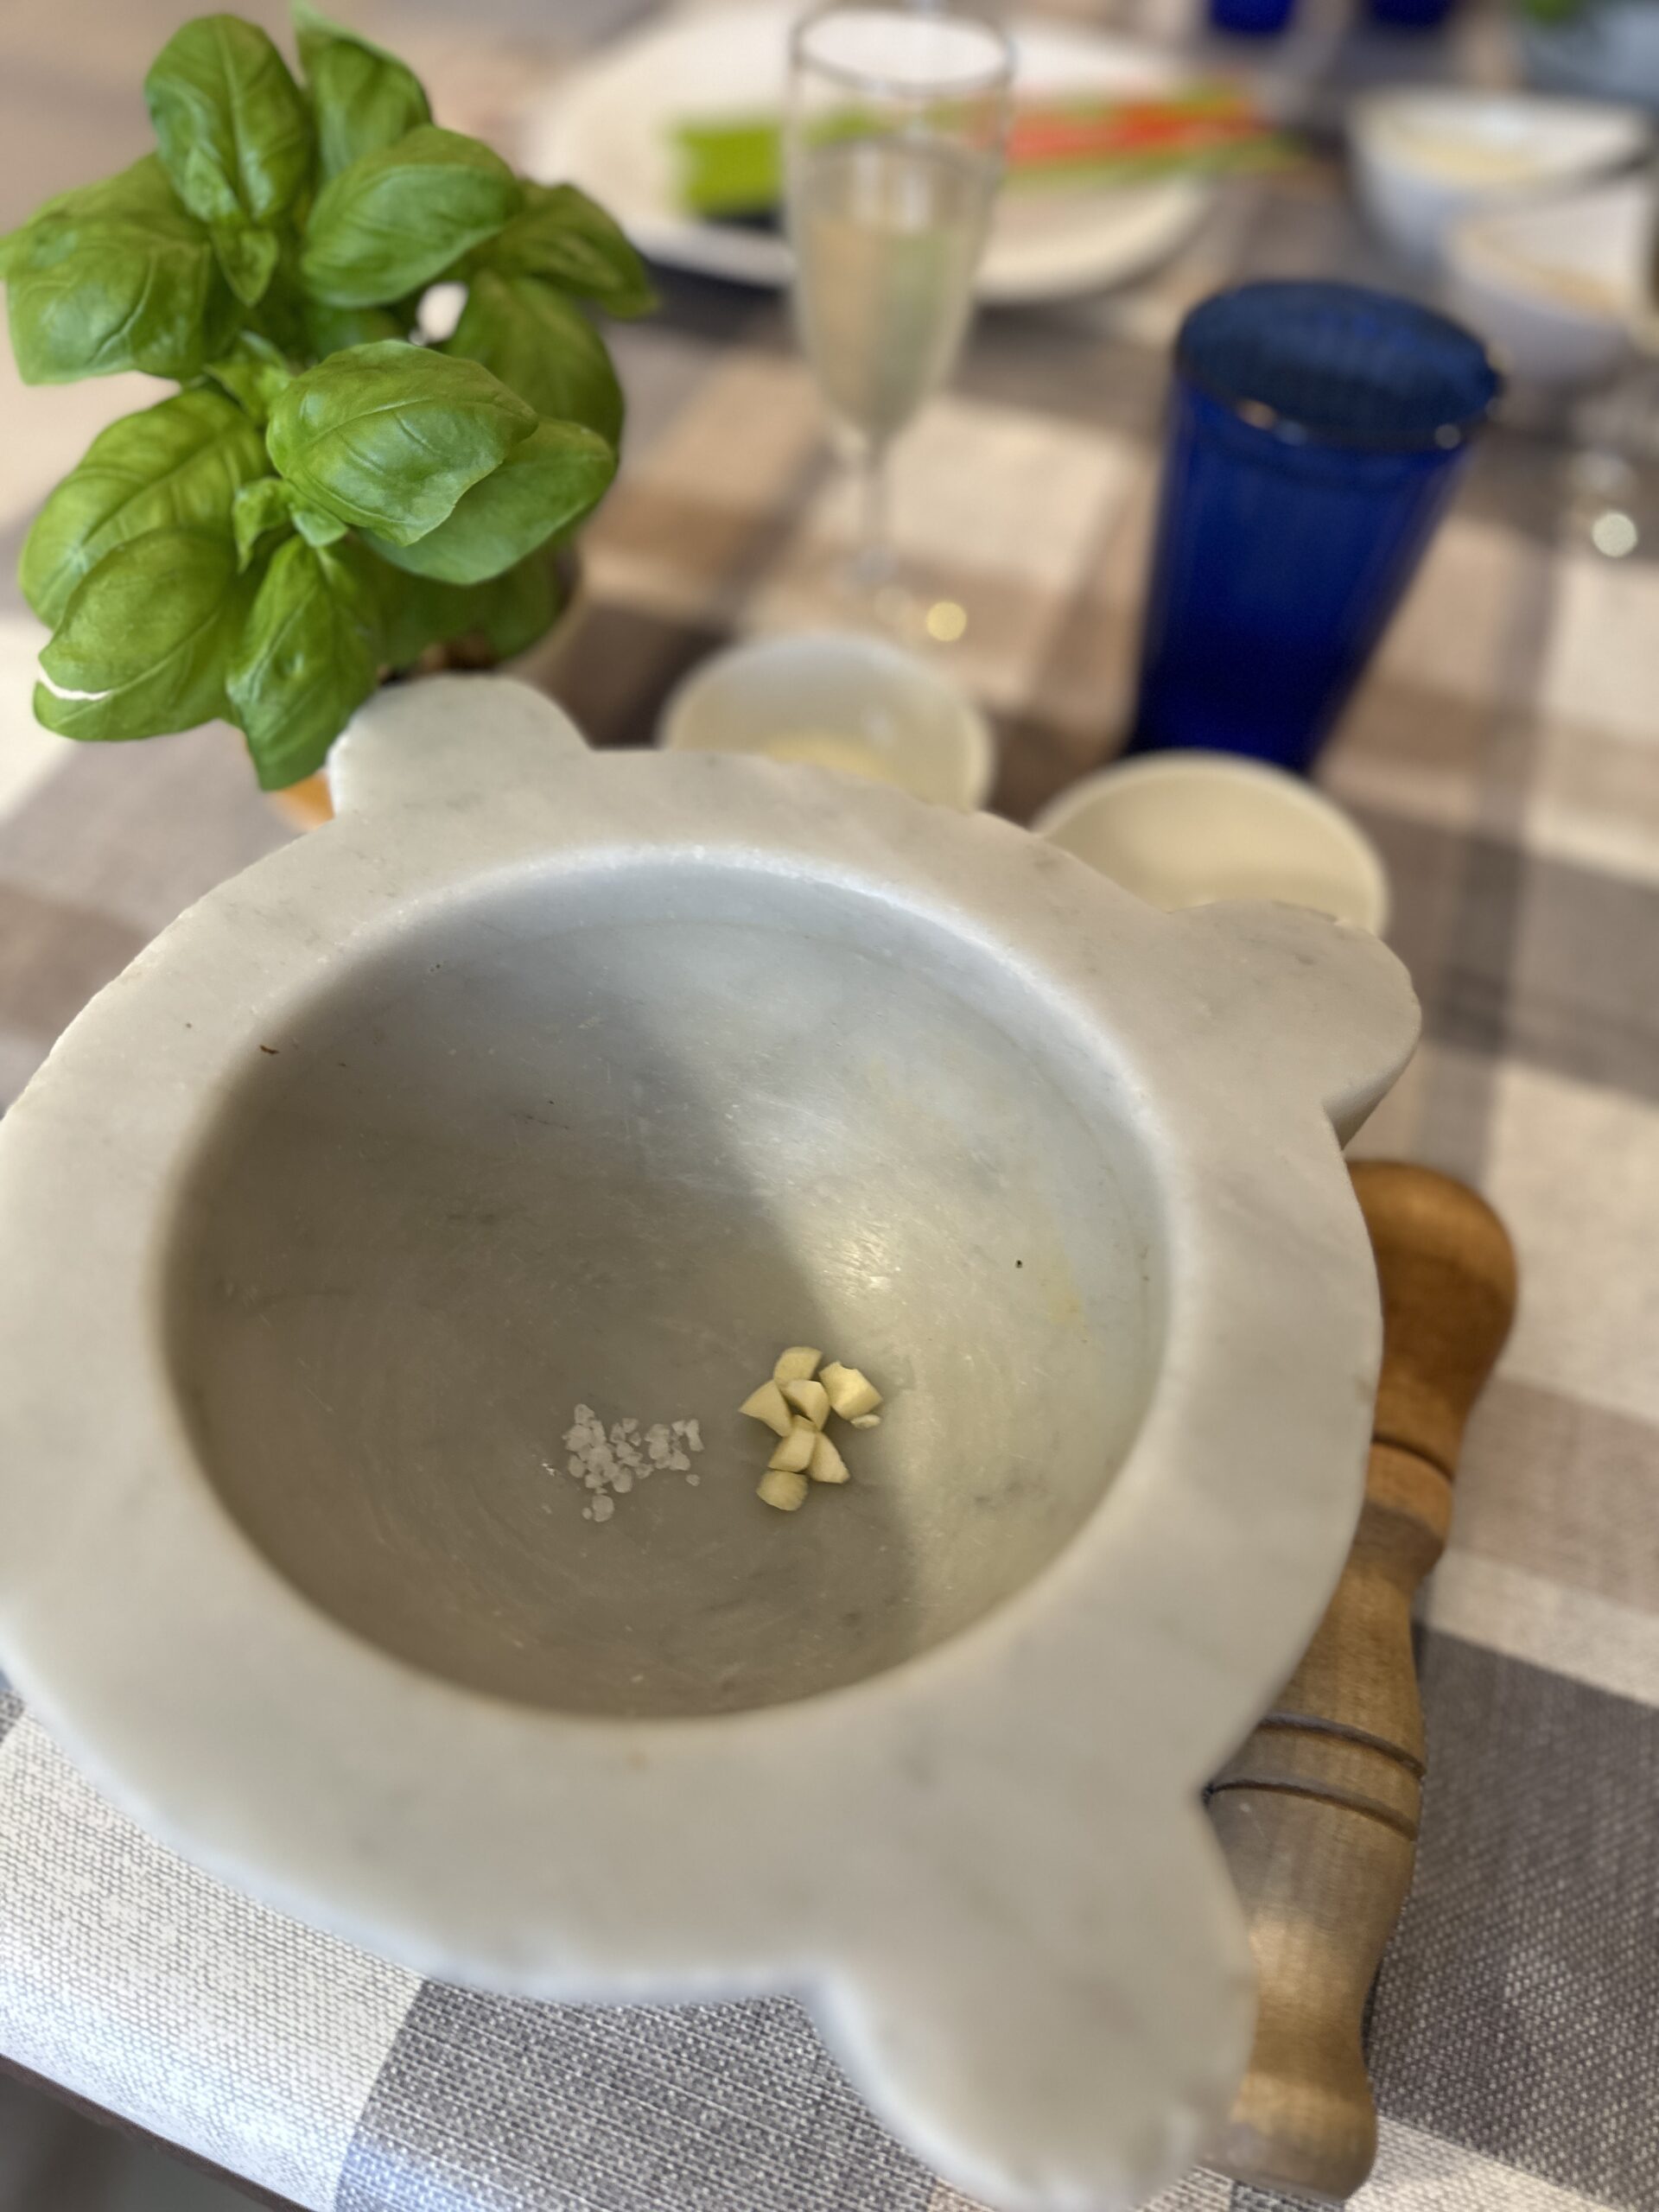 a mortar and pestle sit on a checkered table cloth with sea salt and garlic in the mortar.  A basil plant sits next to it along with a glass of prosecco and glass of water.